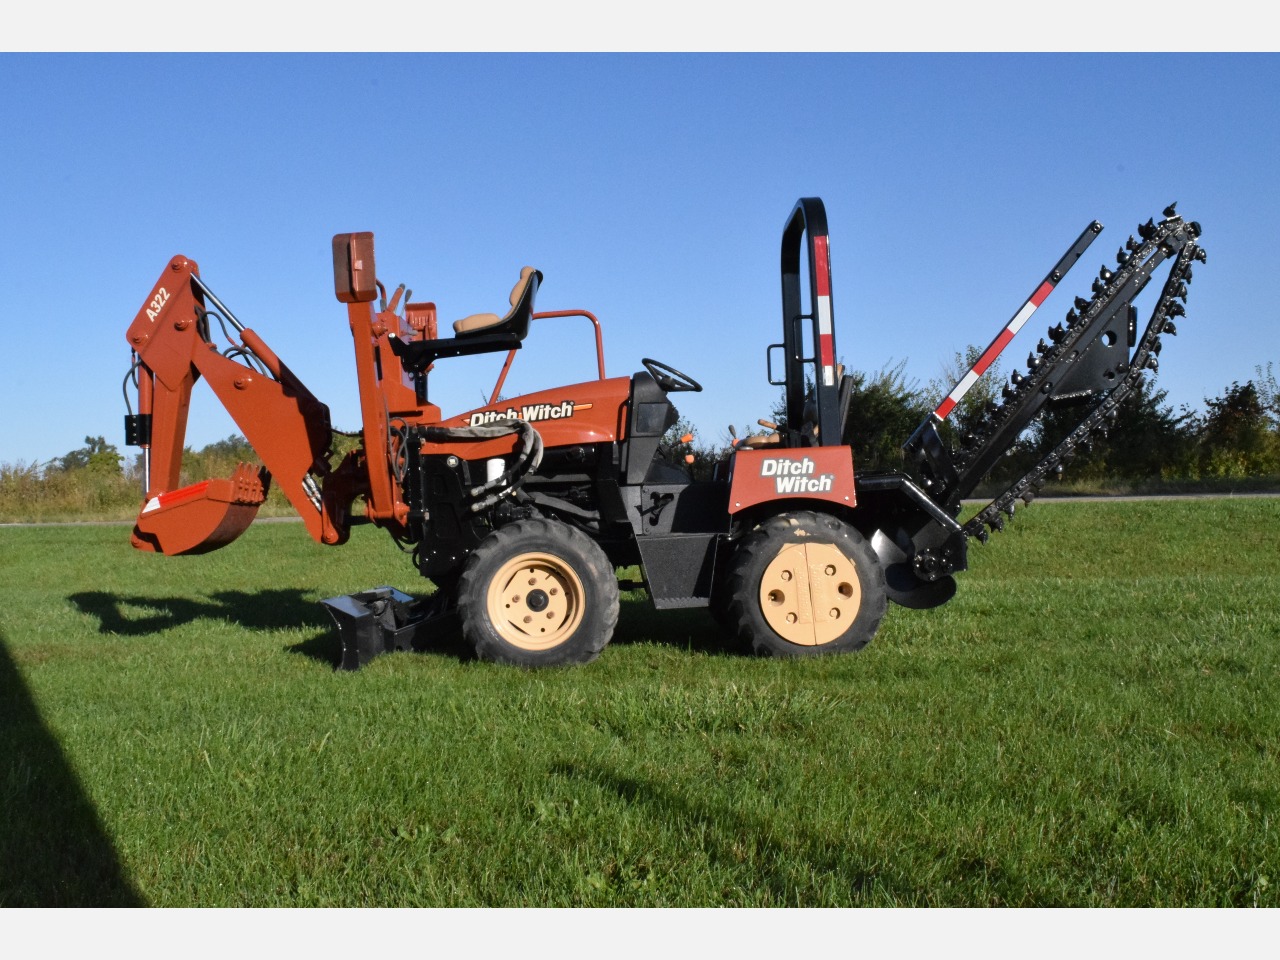 USED 2004 DITCH WITCH RT36 RIDE-ON TRENCHER EQUIPMENT #4010